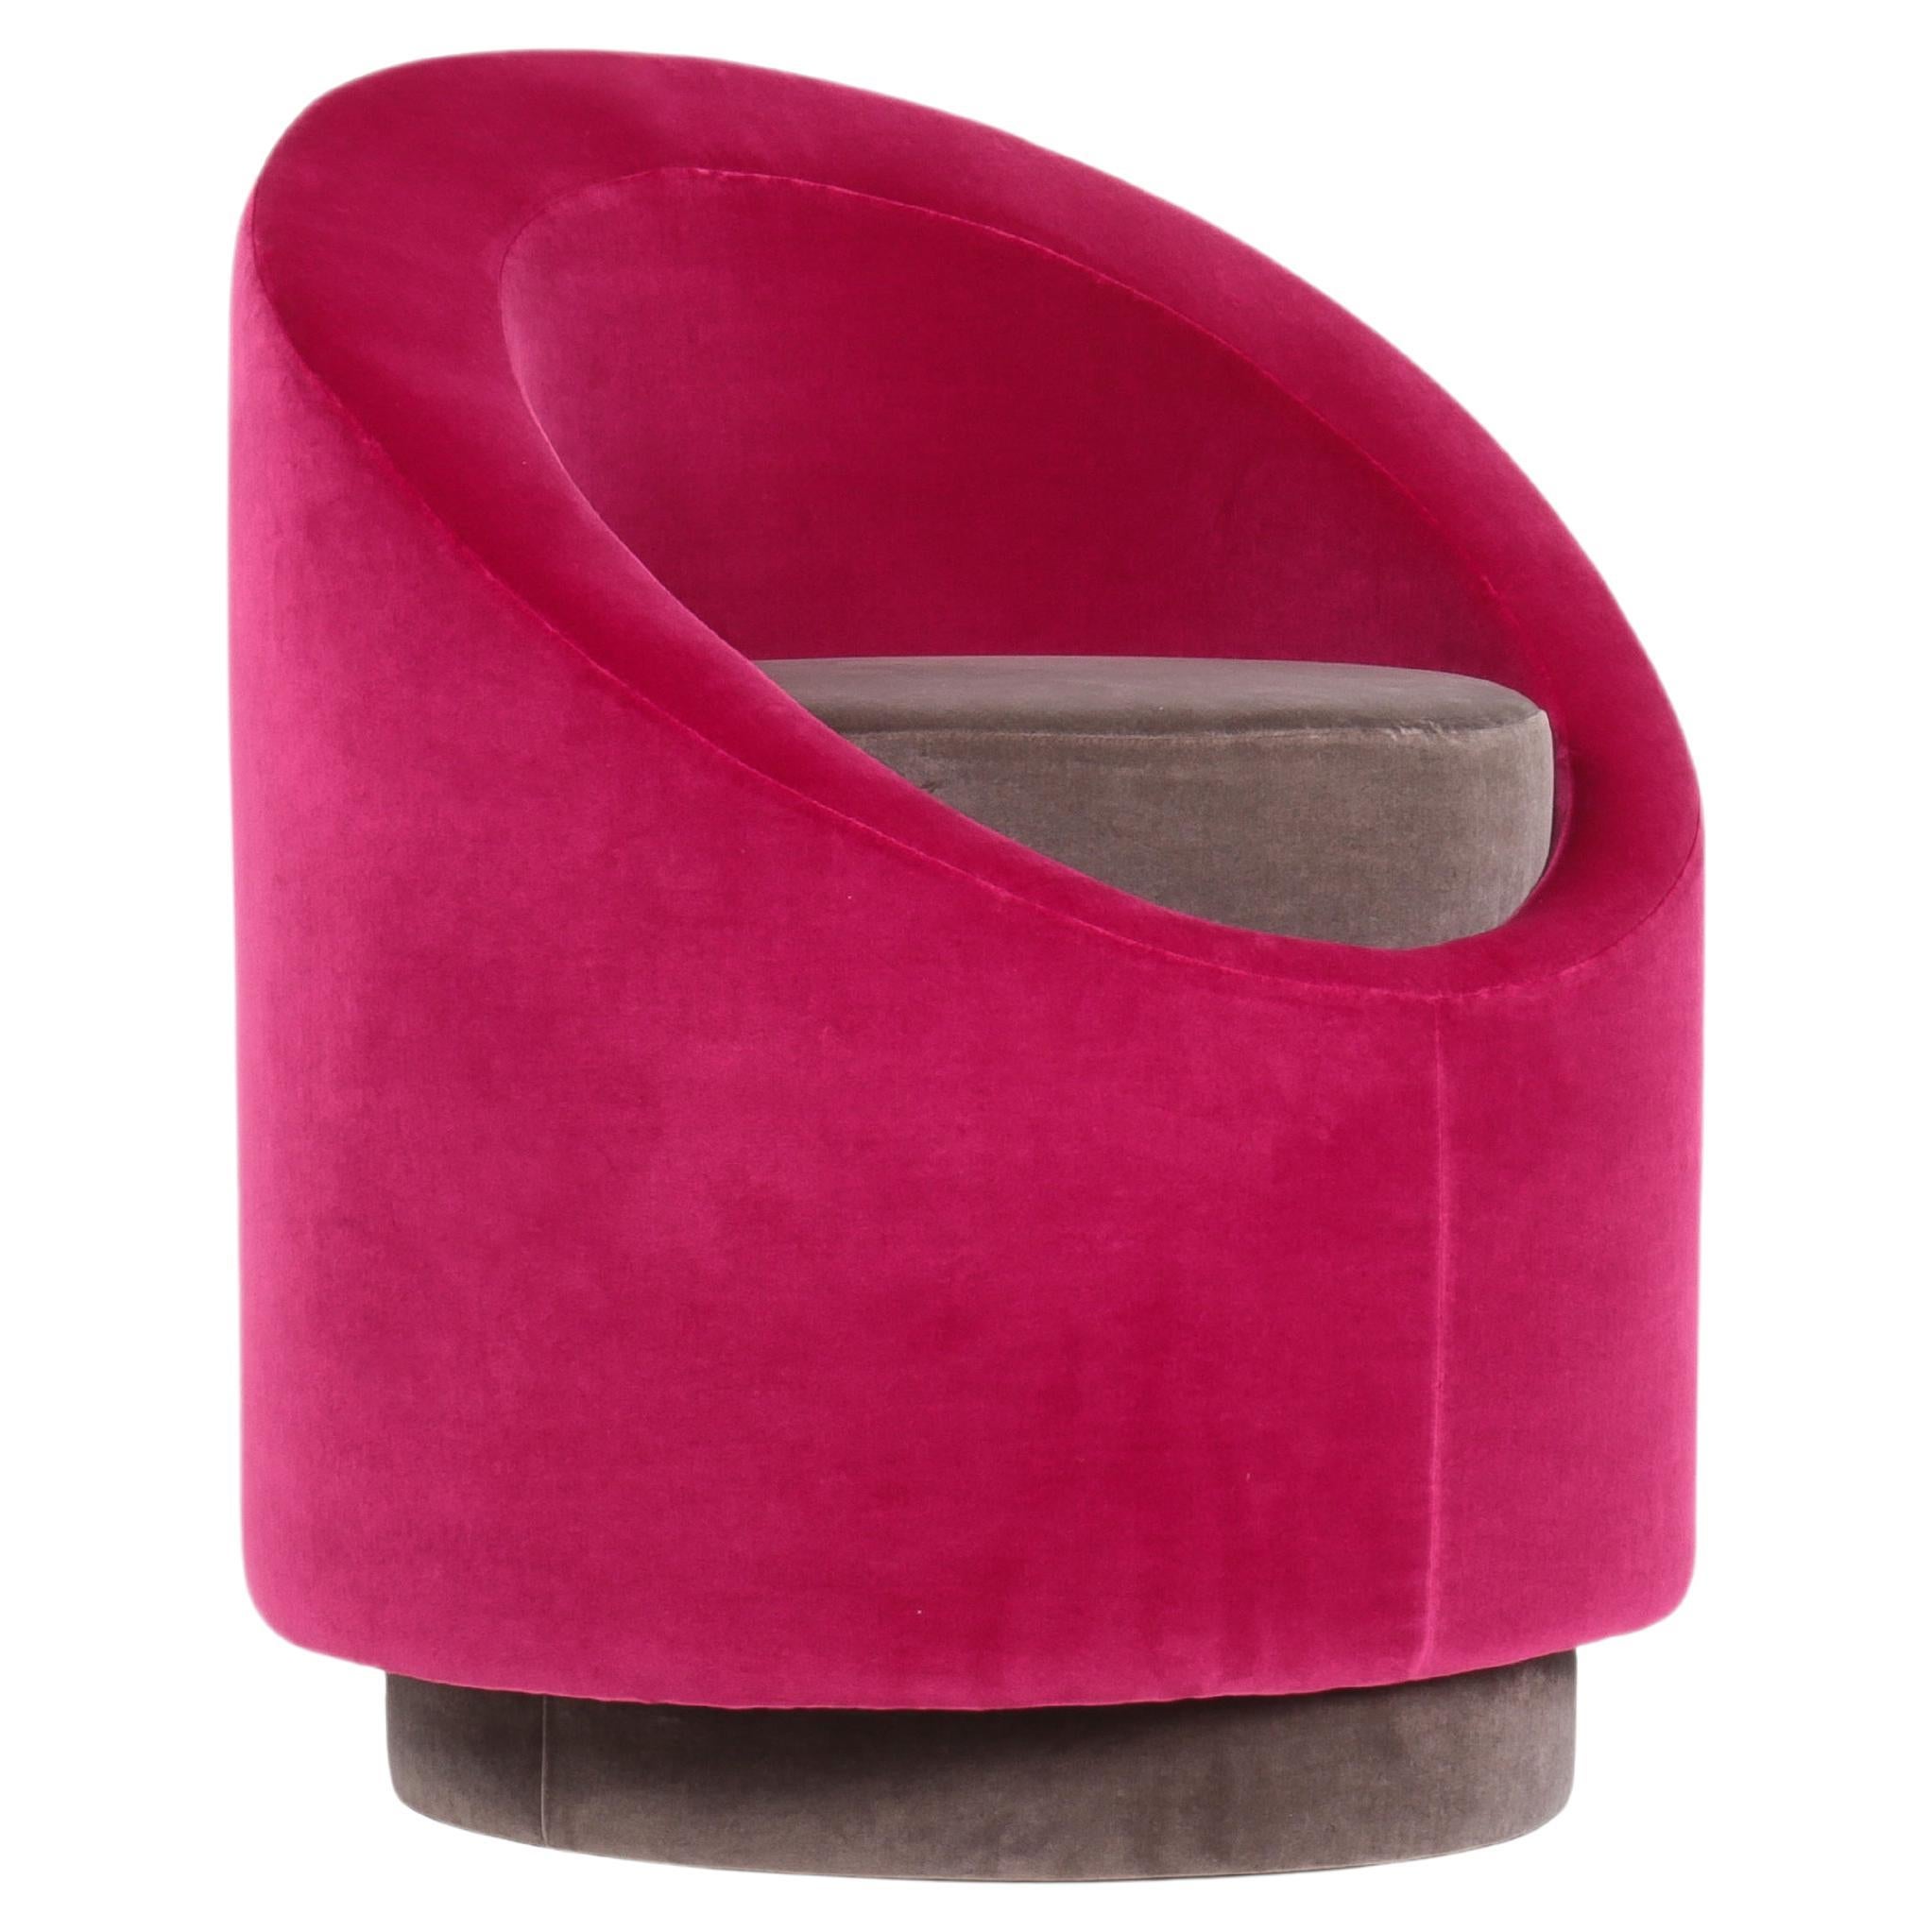 All Around Chair by Pierre Gonalons Kvadrat Fabric Paradisoterrestre Edition